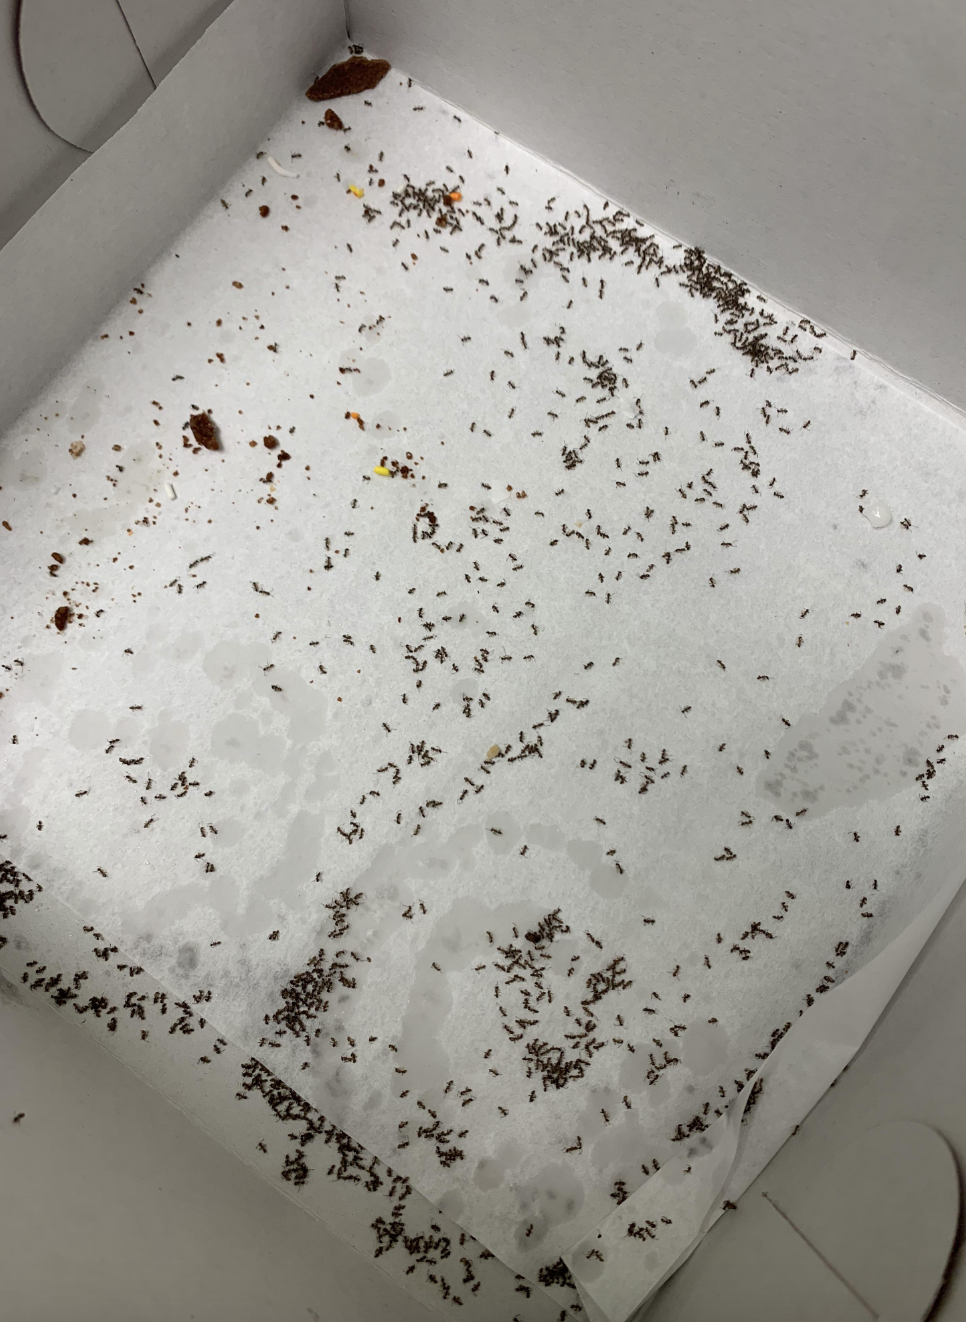 Ants on top of donut box